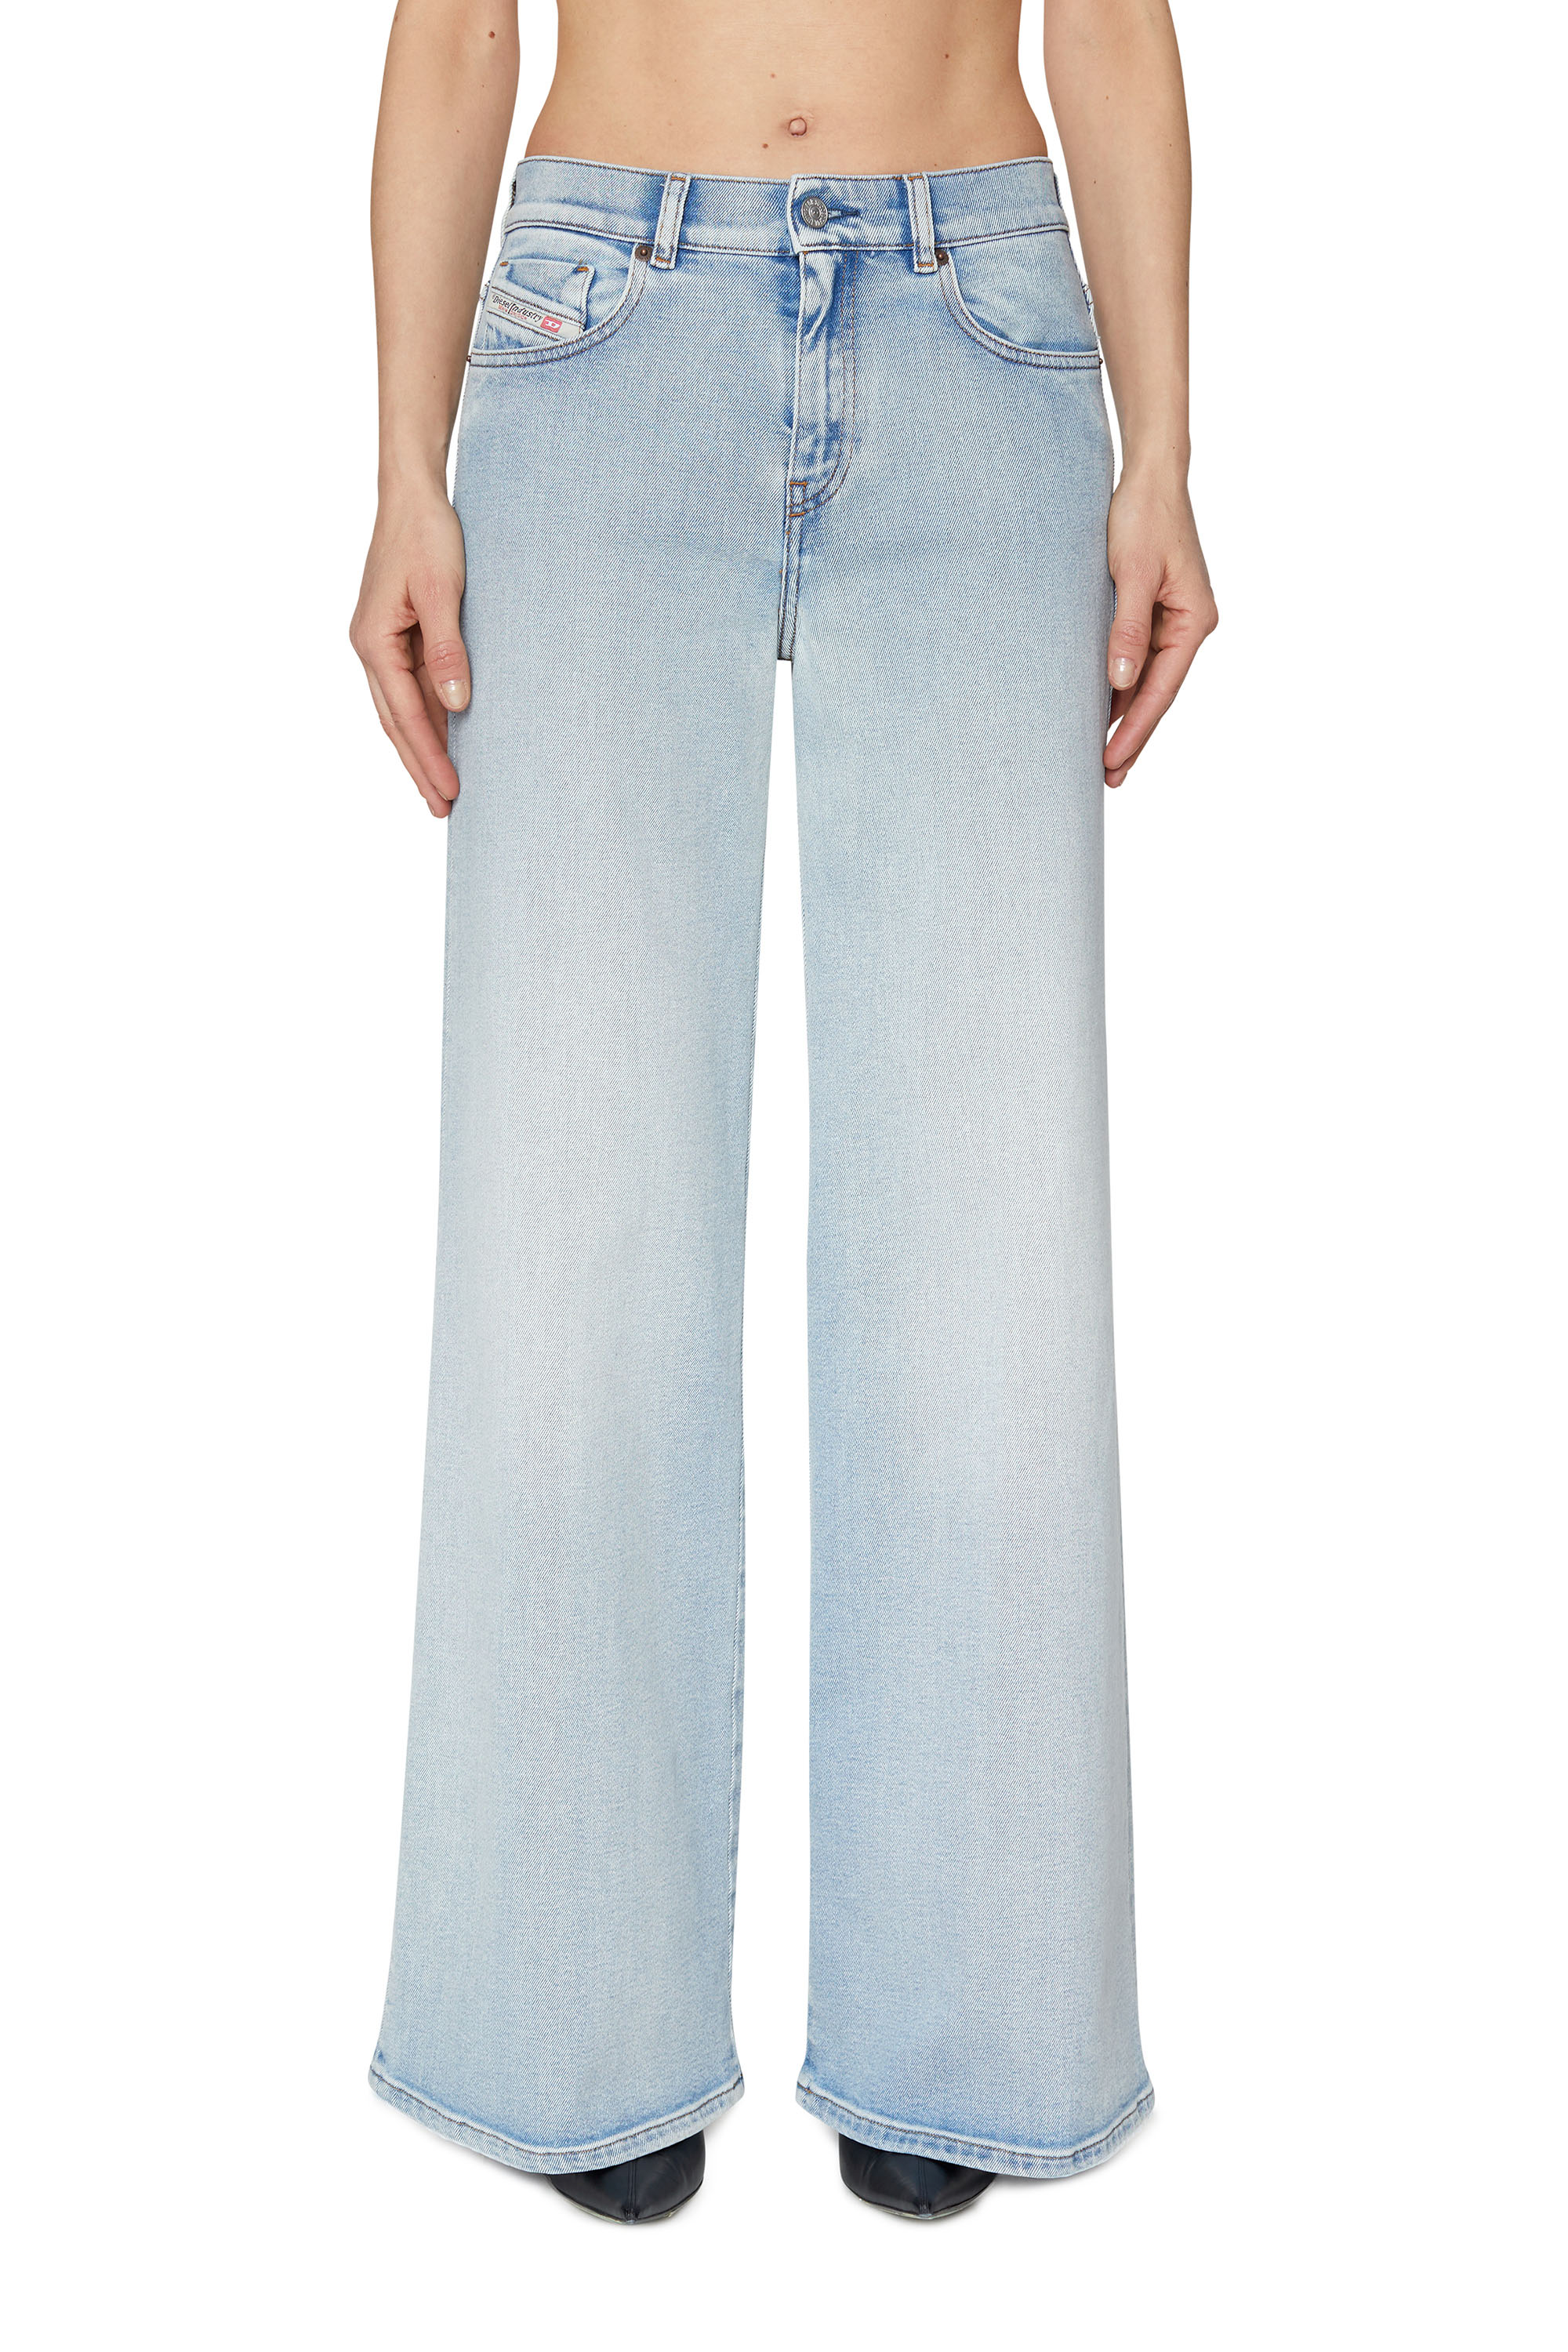 1978 D-AKEMI 09C08 Bootcut and Flare Jeans, Light Blue - Jeans